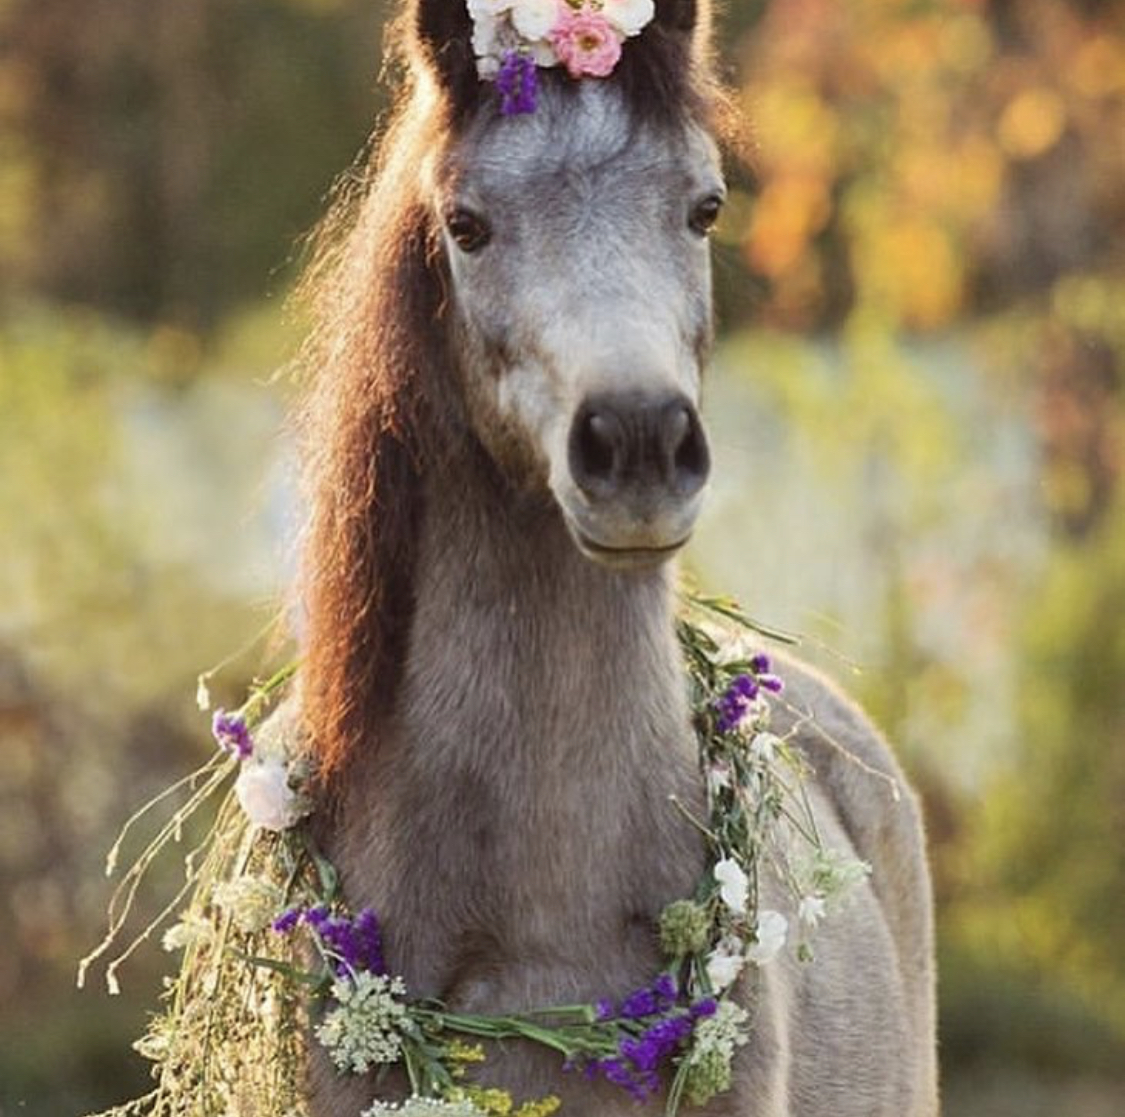 A Horse wearing flowers around its neck and on top of its head